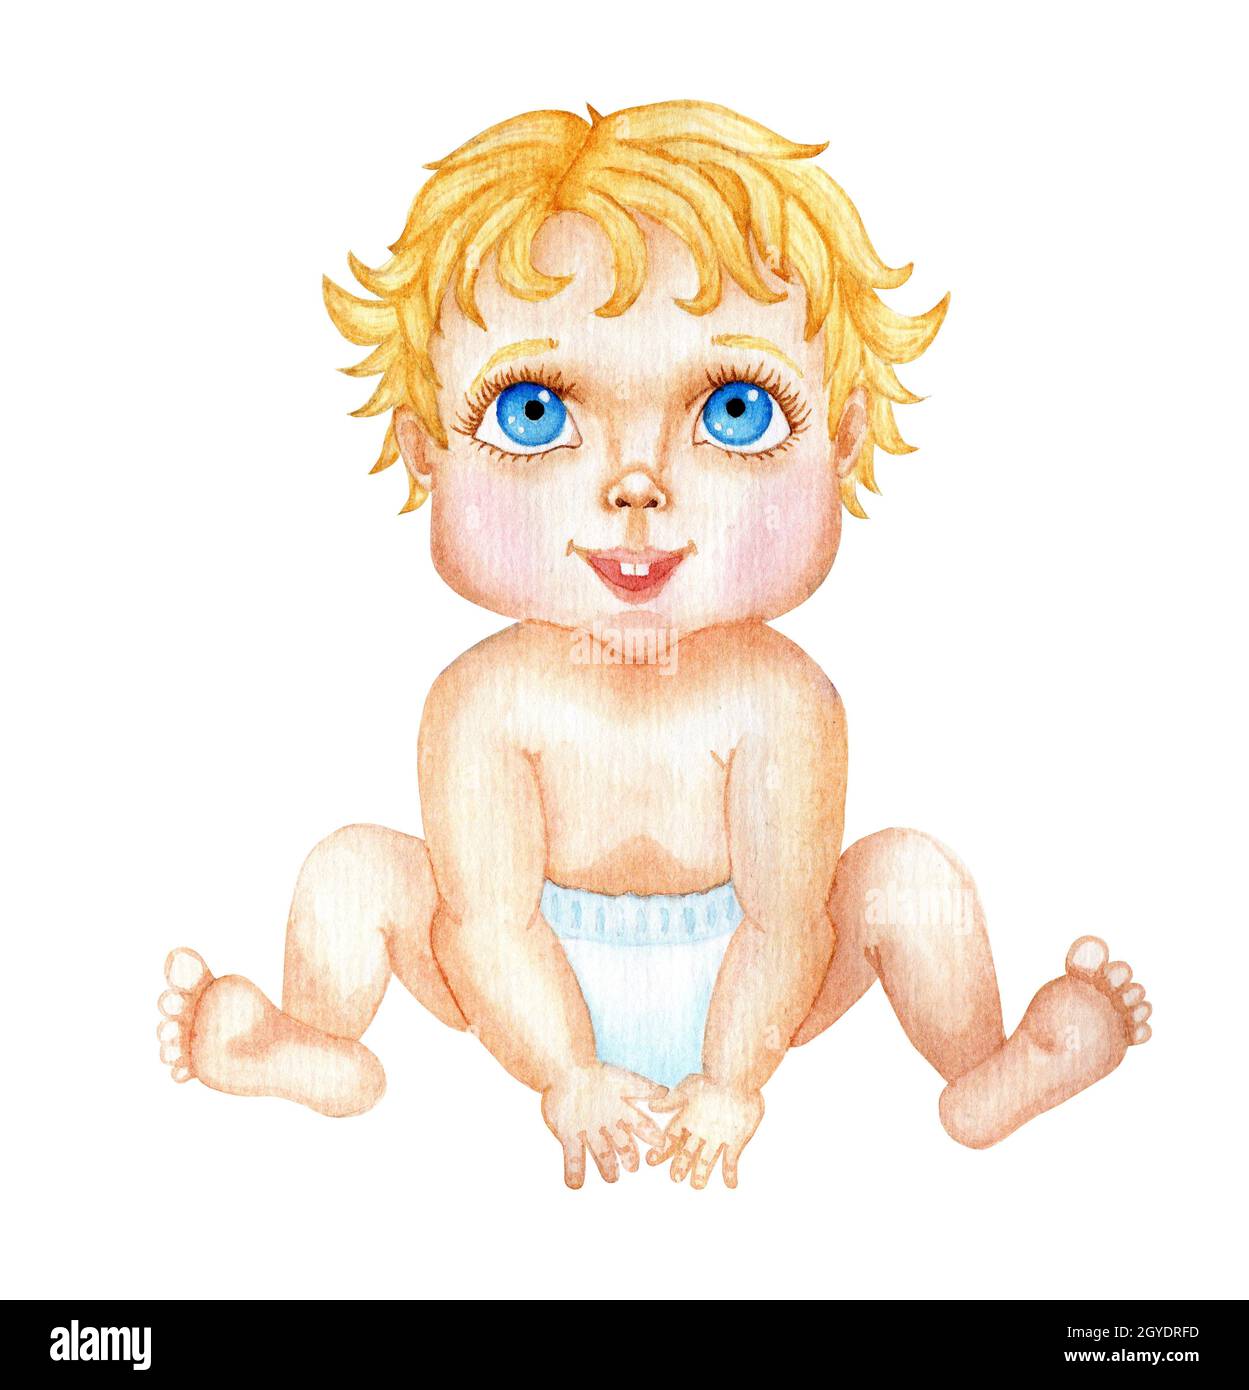 Watercolor cute little baby with big blue eyes sits in a diaper. Children`s cartoon illustration isolated on white background. Drawn by hand. Stock Photo